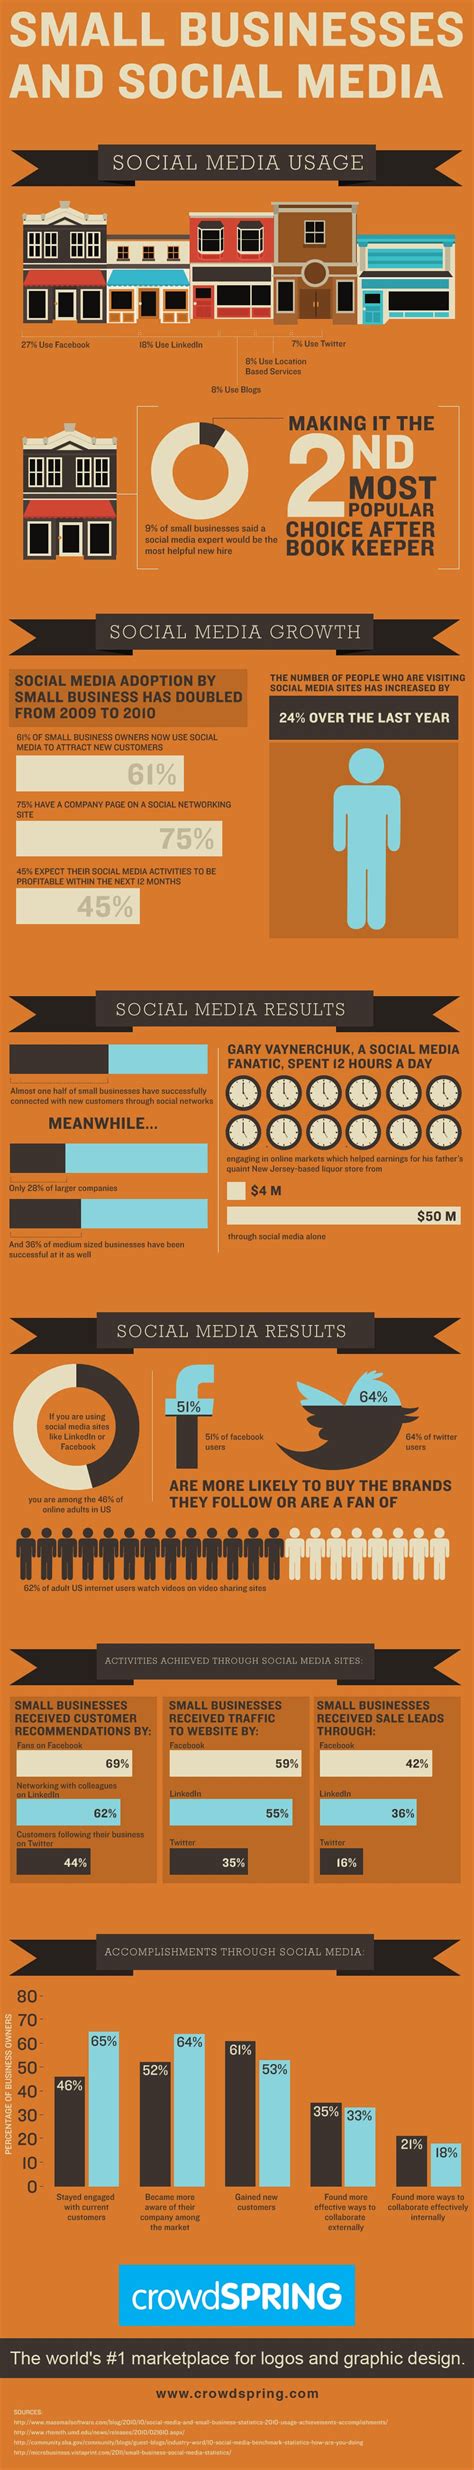 How Small Businesses Are Using Social Media Infographic Crowdspring